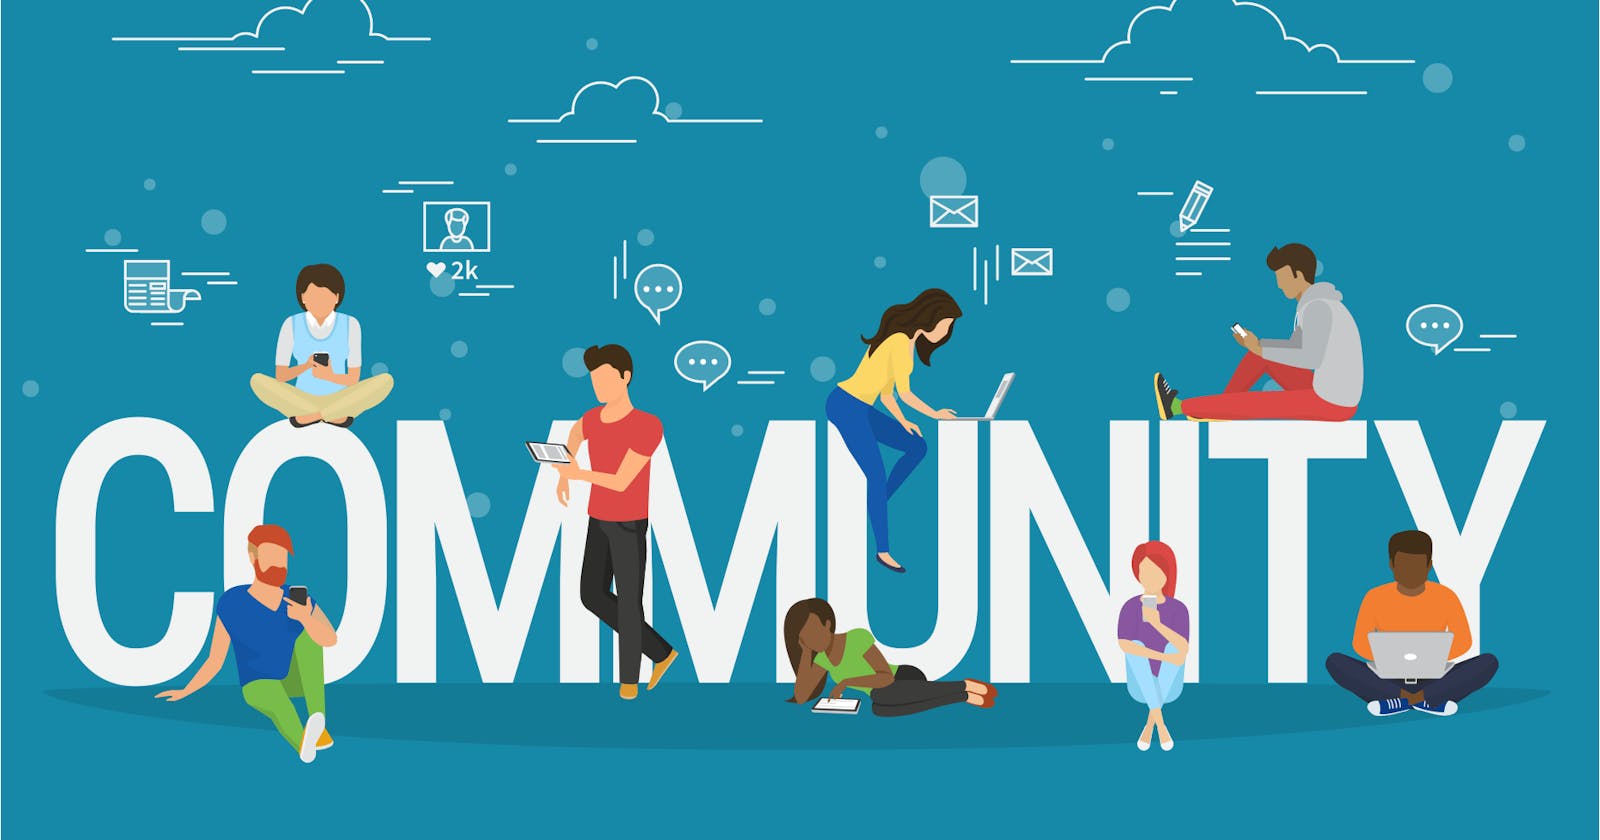 "Exploring the Power of Community"